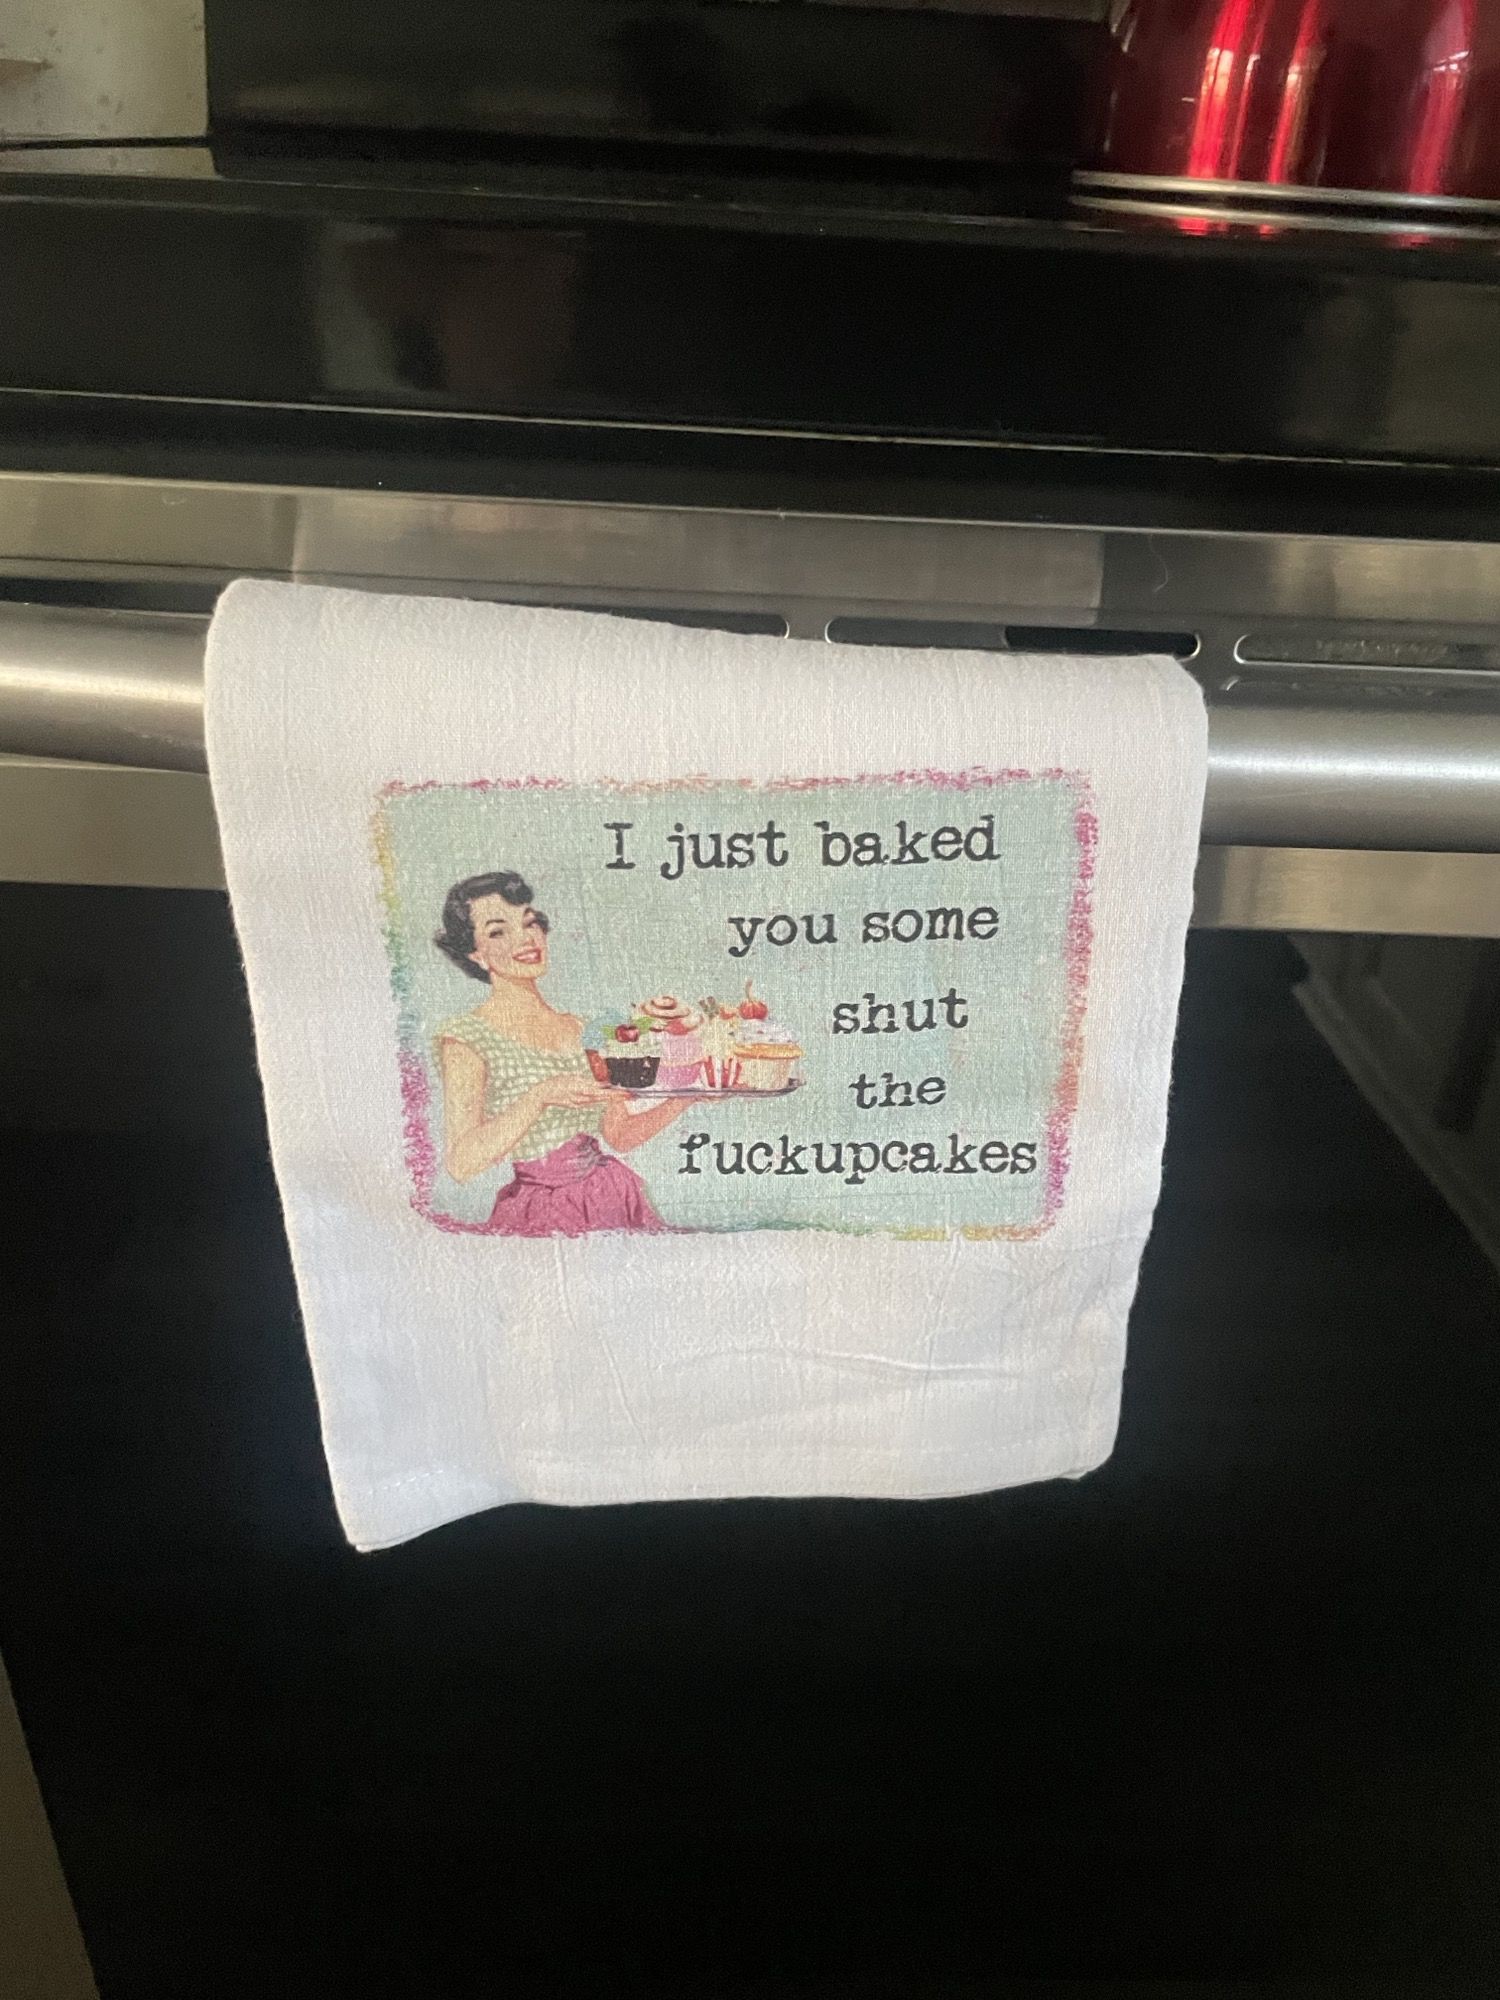 My wife’s new kitchen towel